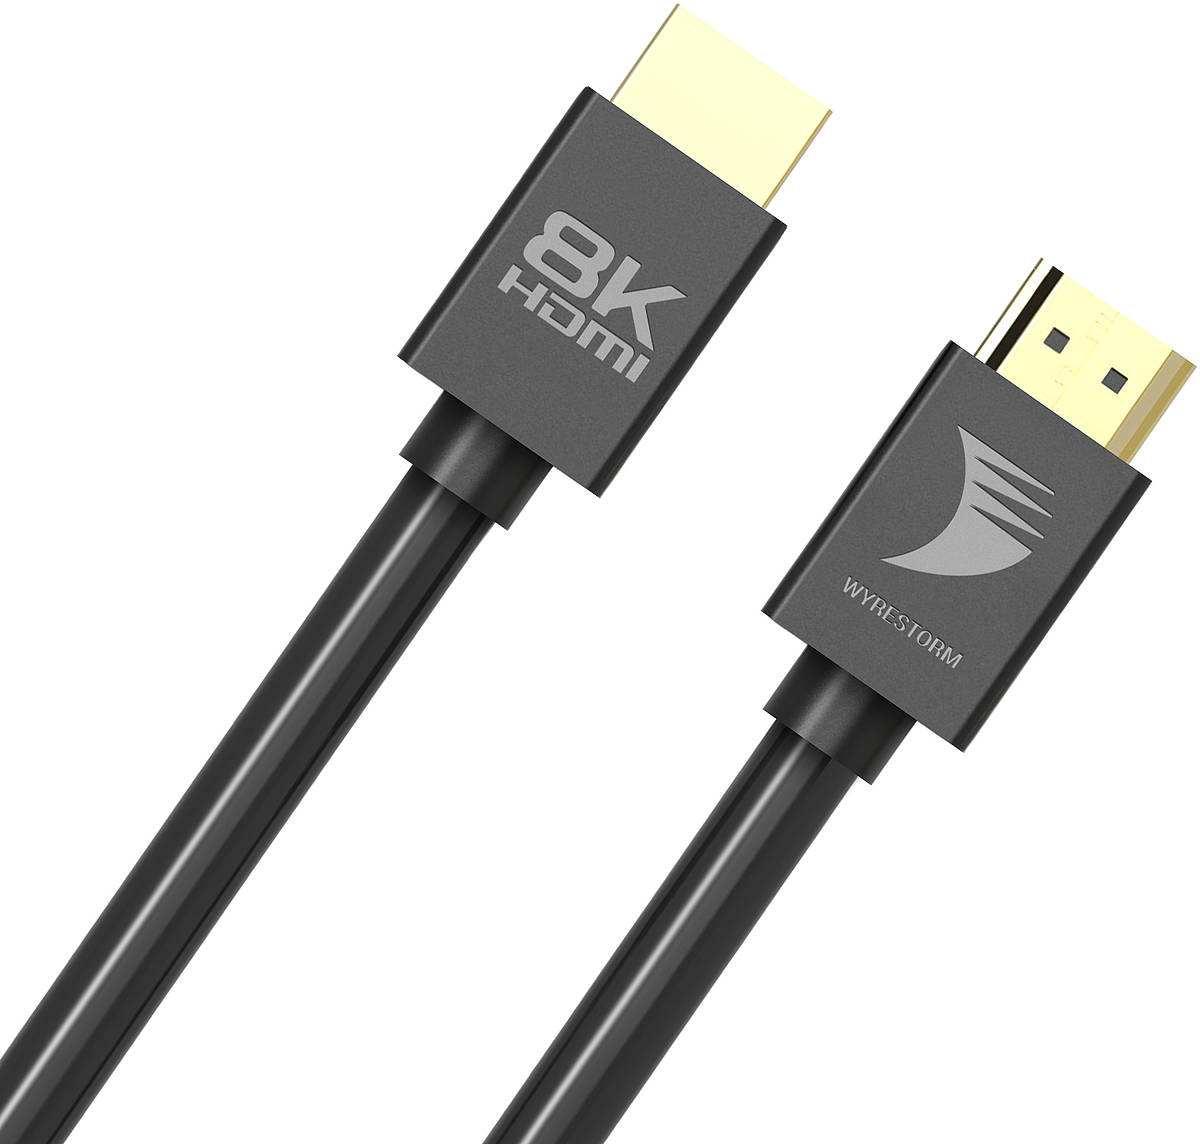 EXP-HDMI-5M-8K 5.00m WyreStorm 8K 60 HDMI 2.1 cable product image. Click to enlarge.